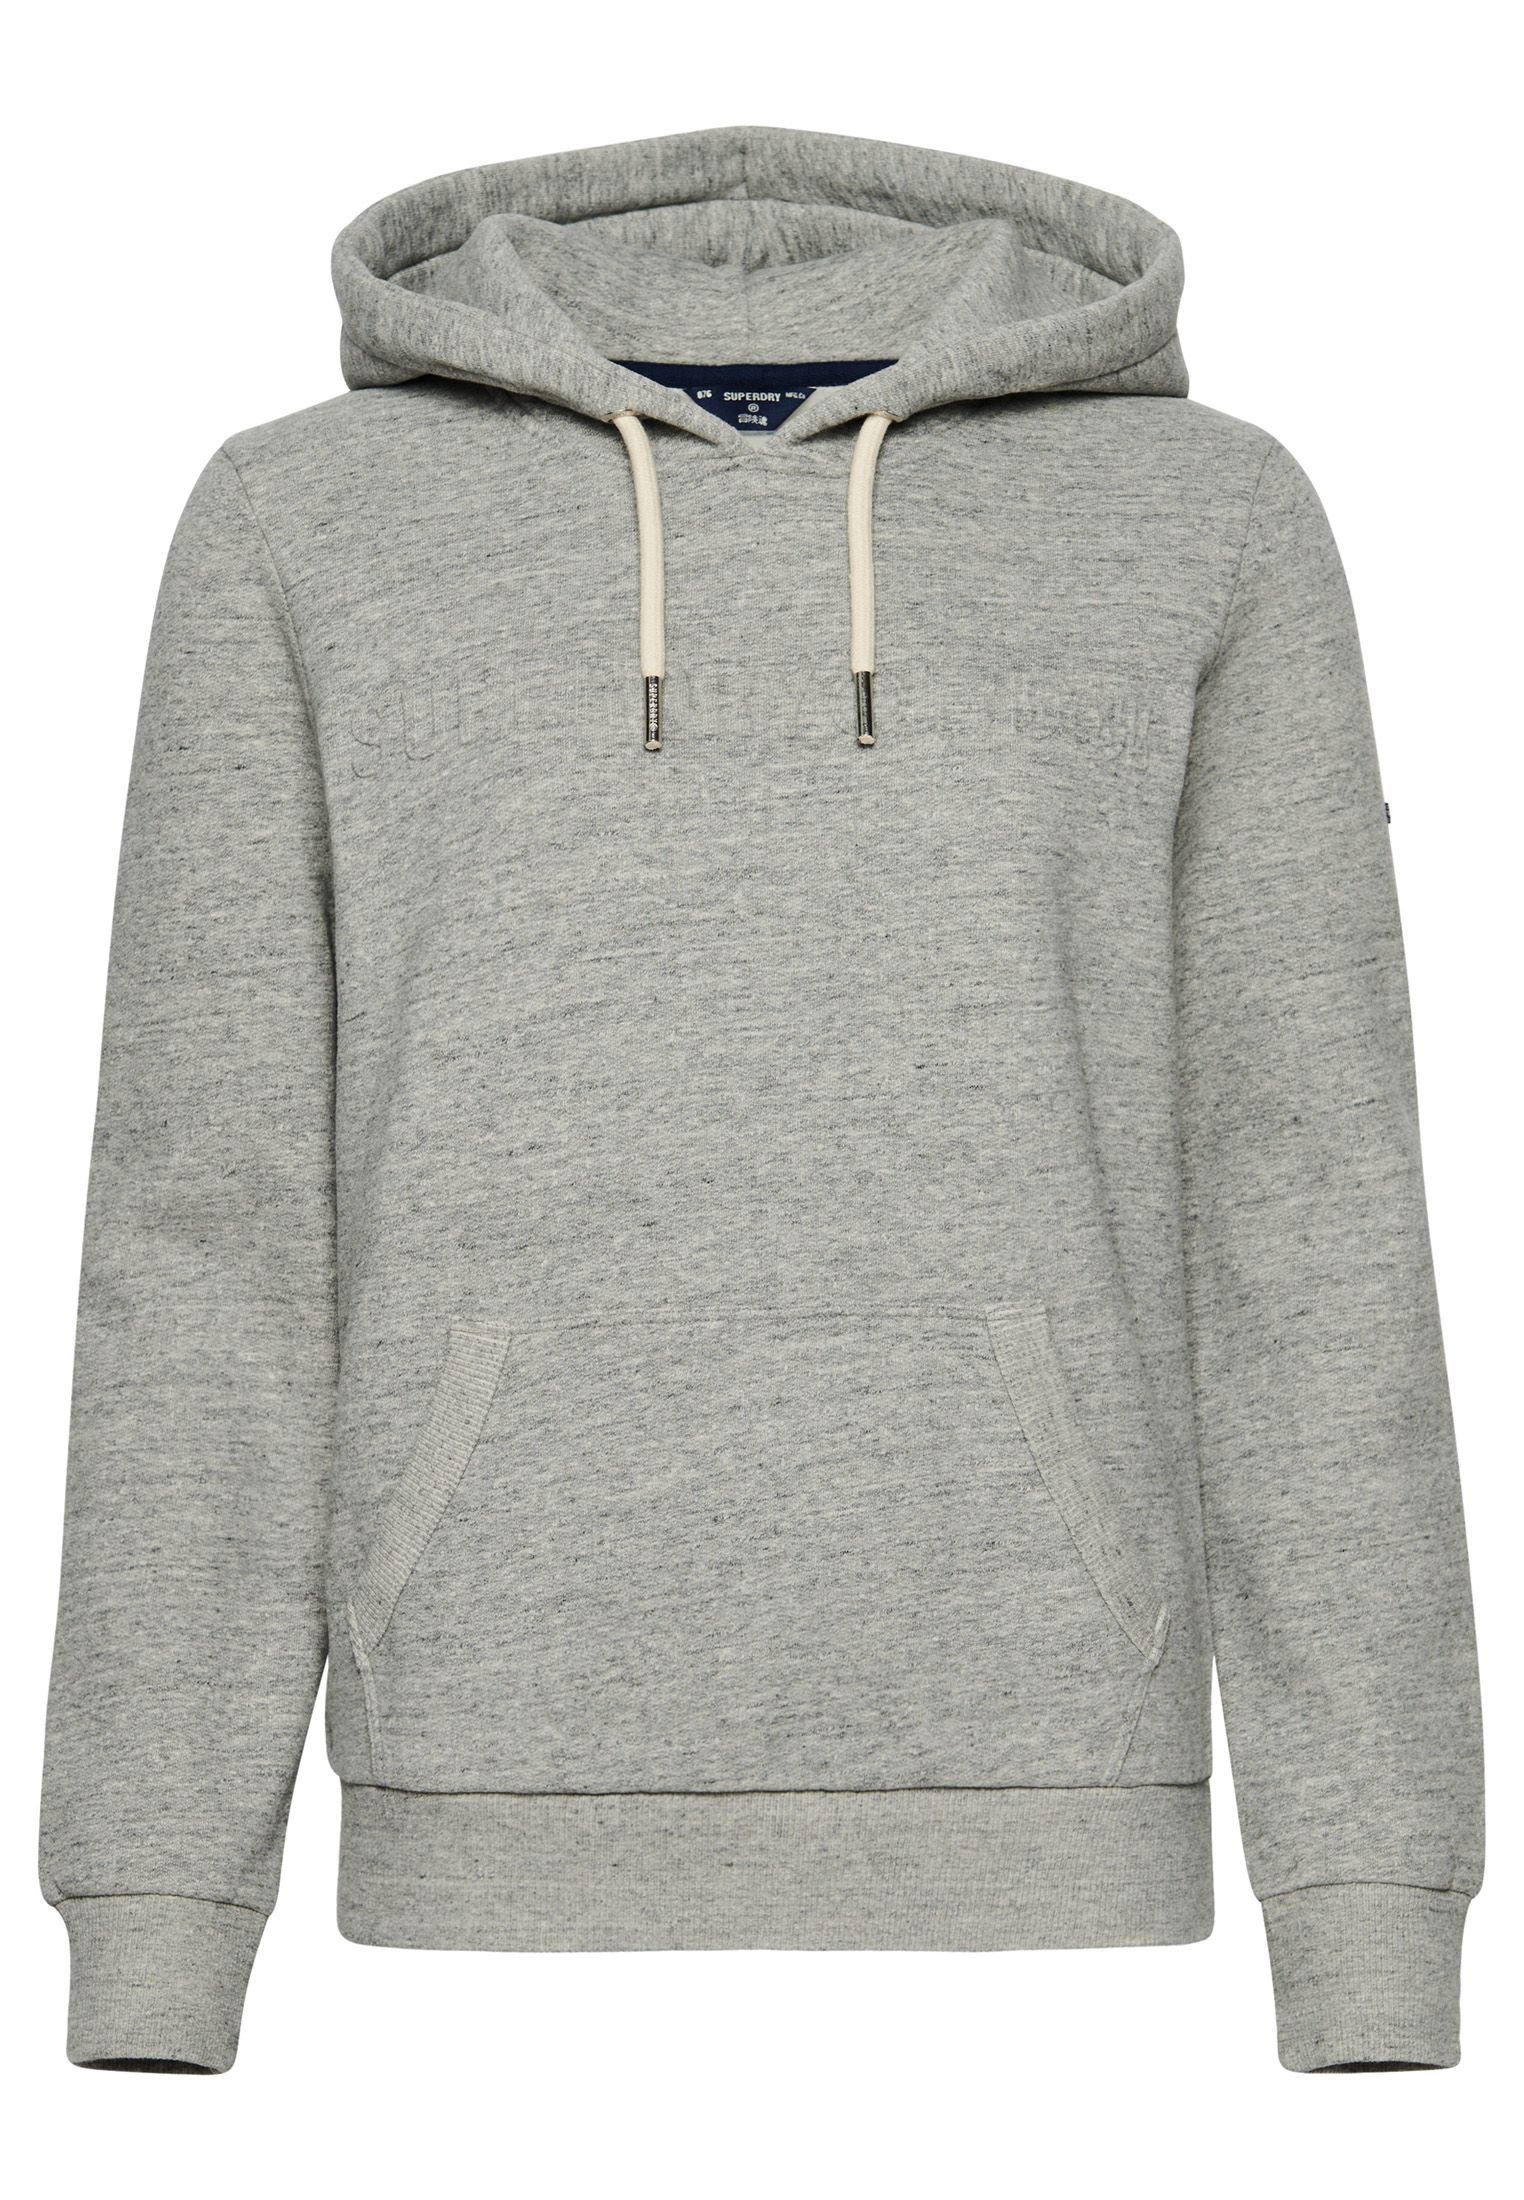 Vintage style combined a retro vibe with modern comforts, and this hoodie offers a subtle, sleek layering option. Featuring an embossed design, it's a perfect pick with jeans and trainers.Relaxed fit – the classic Superdry fit. Not too slim, not too loose, just right. Go for your normal sizeDraw cord hoodLong sleevesRibbed trimsFront pouch pocketEmbossed Superdry logoSignature Superdry patch